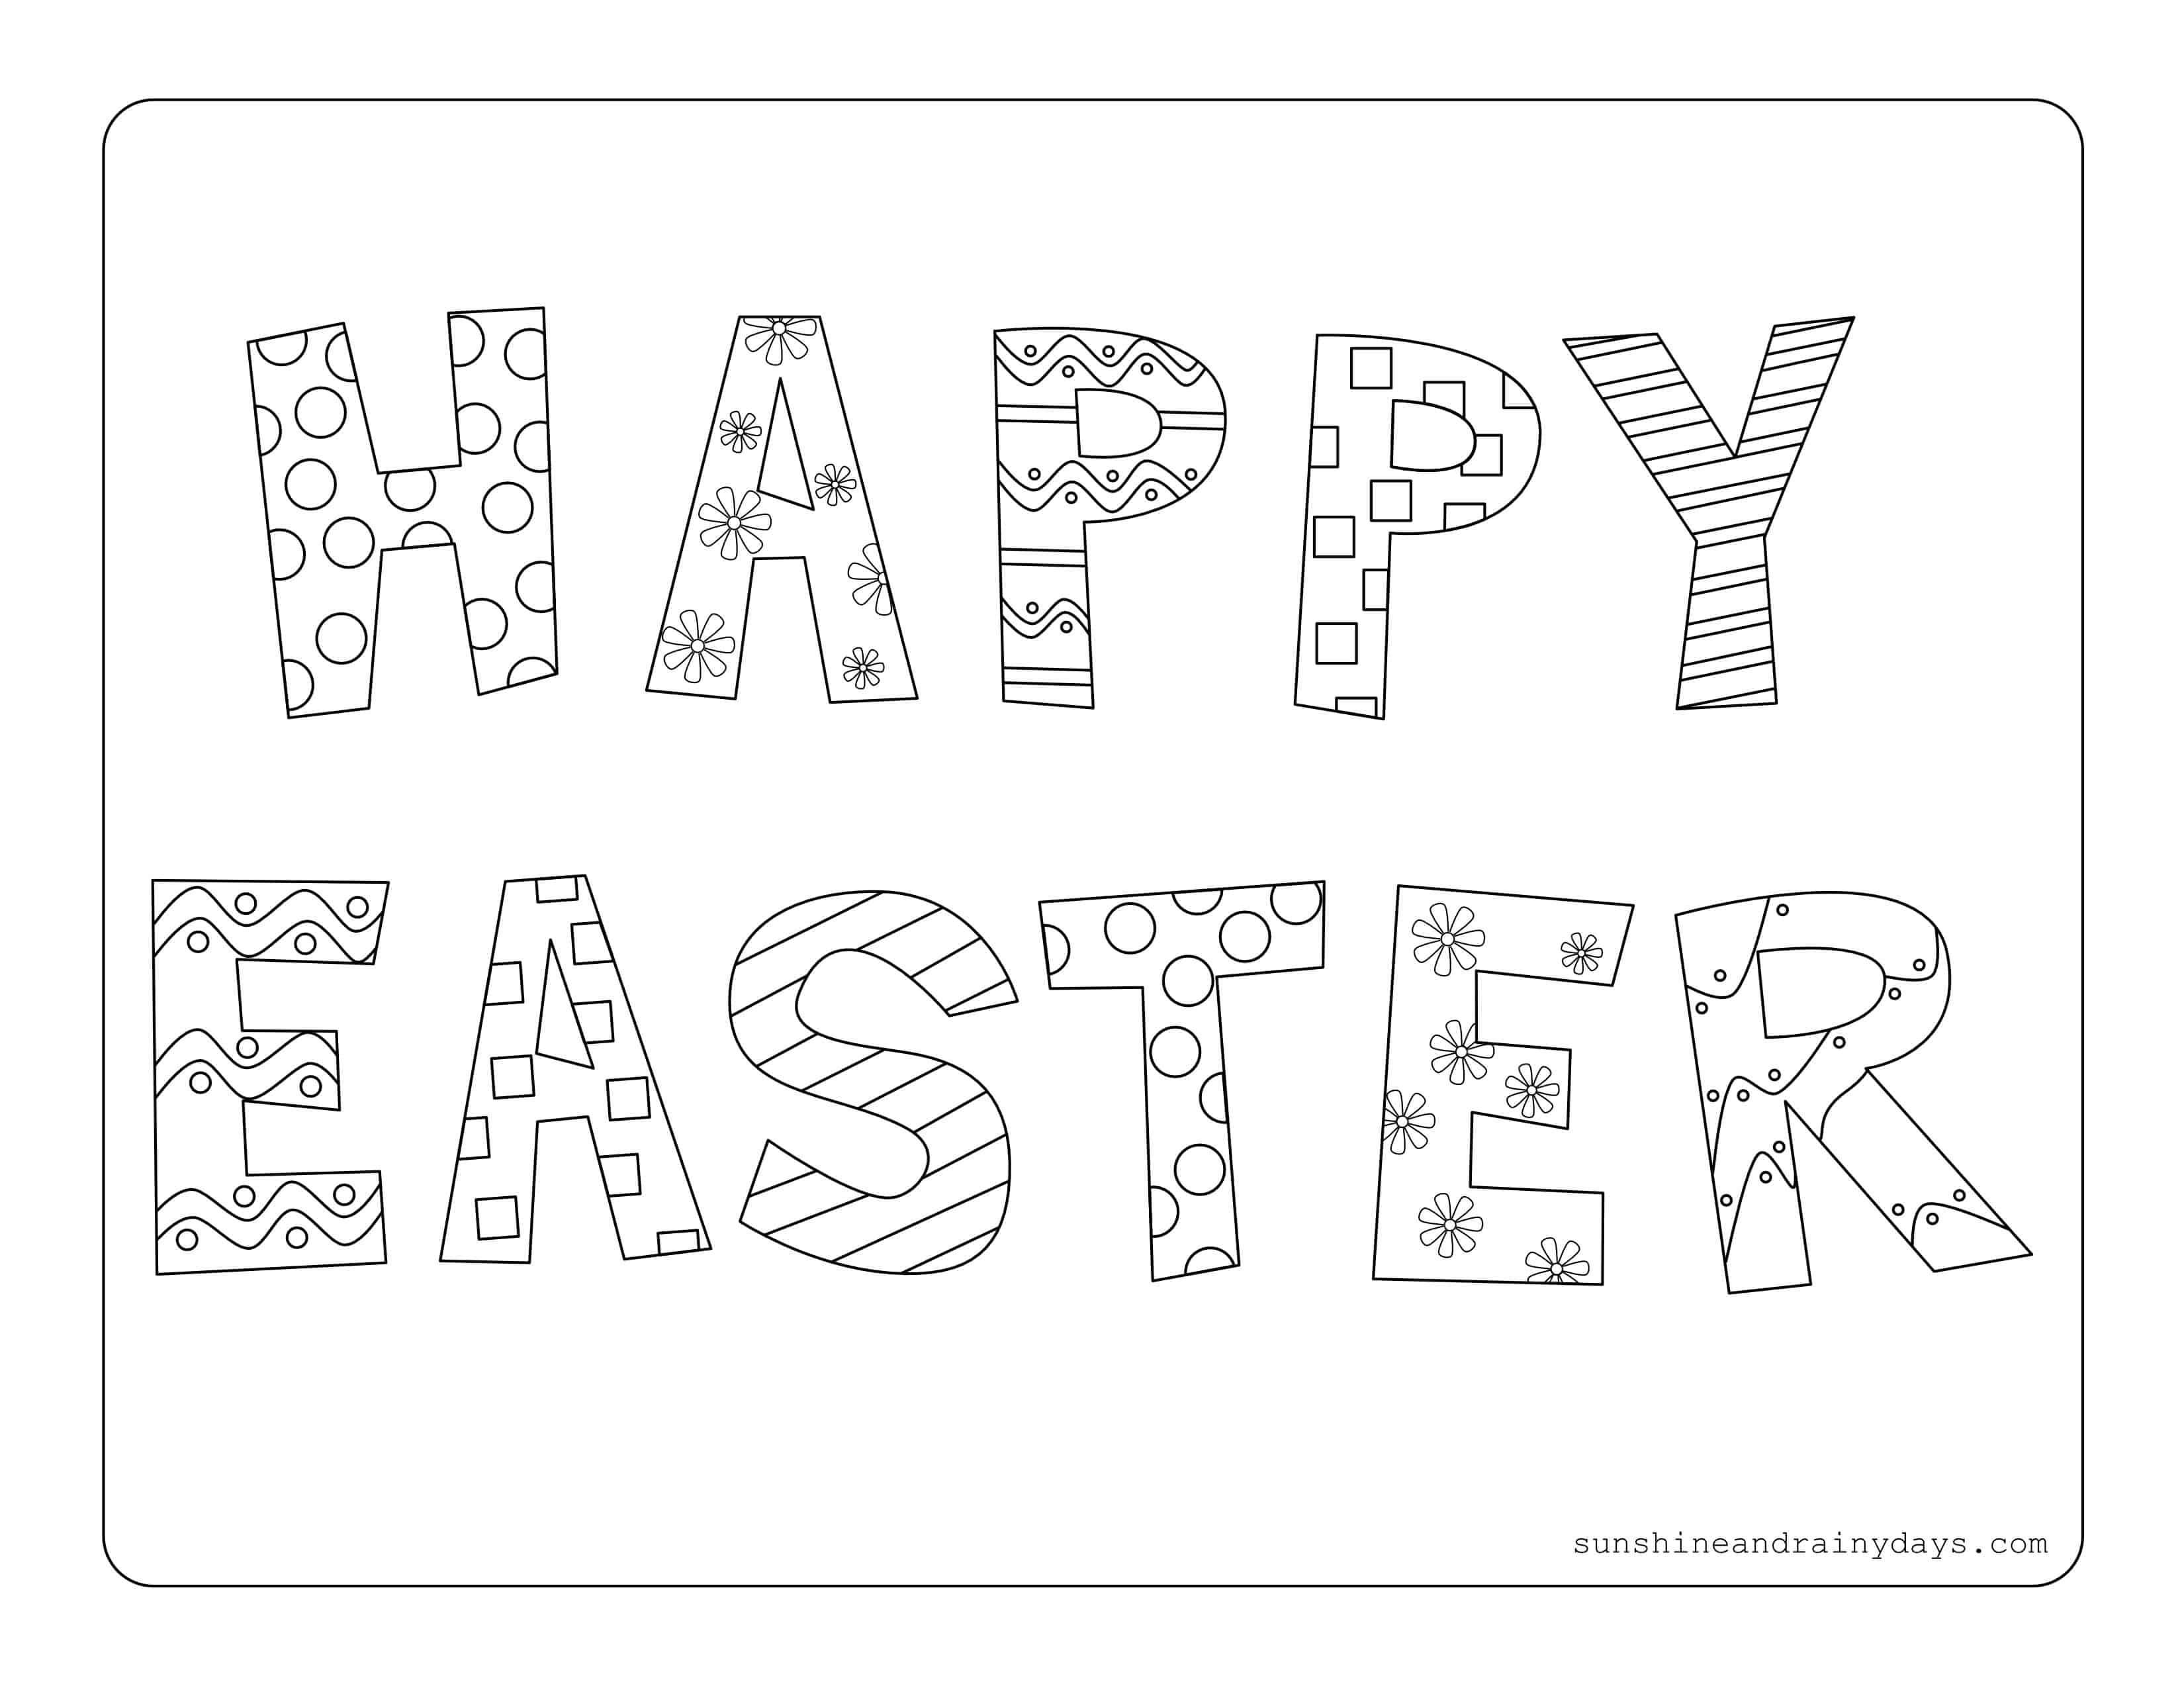 Happy Easter Coloring Page - Sunshine And Rainy Days